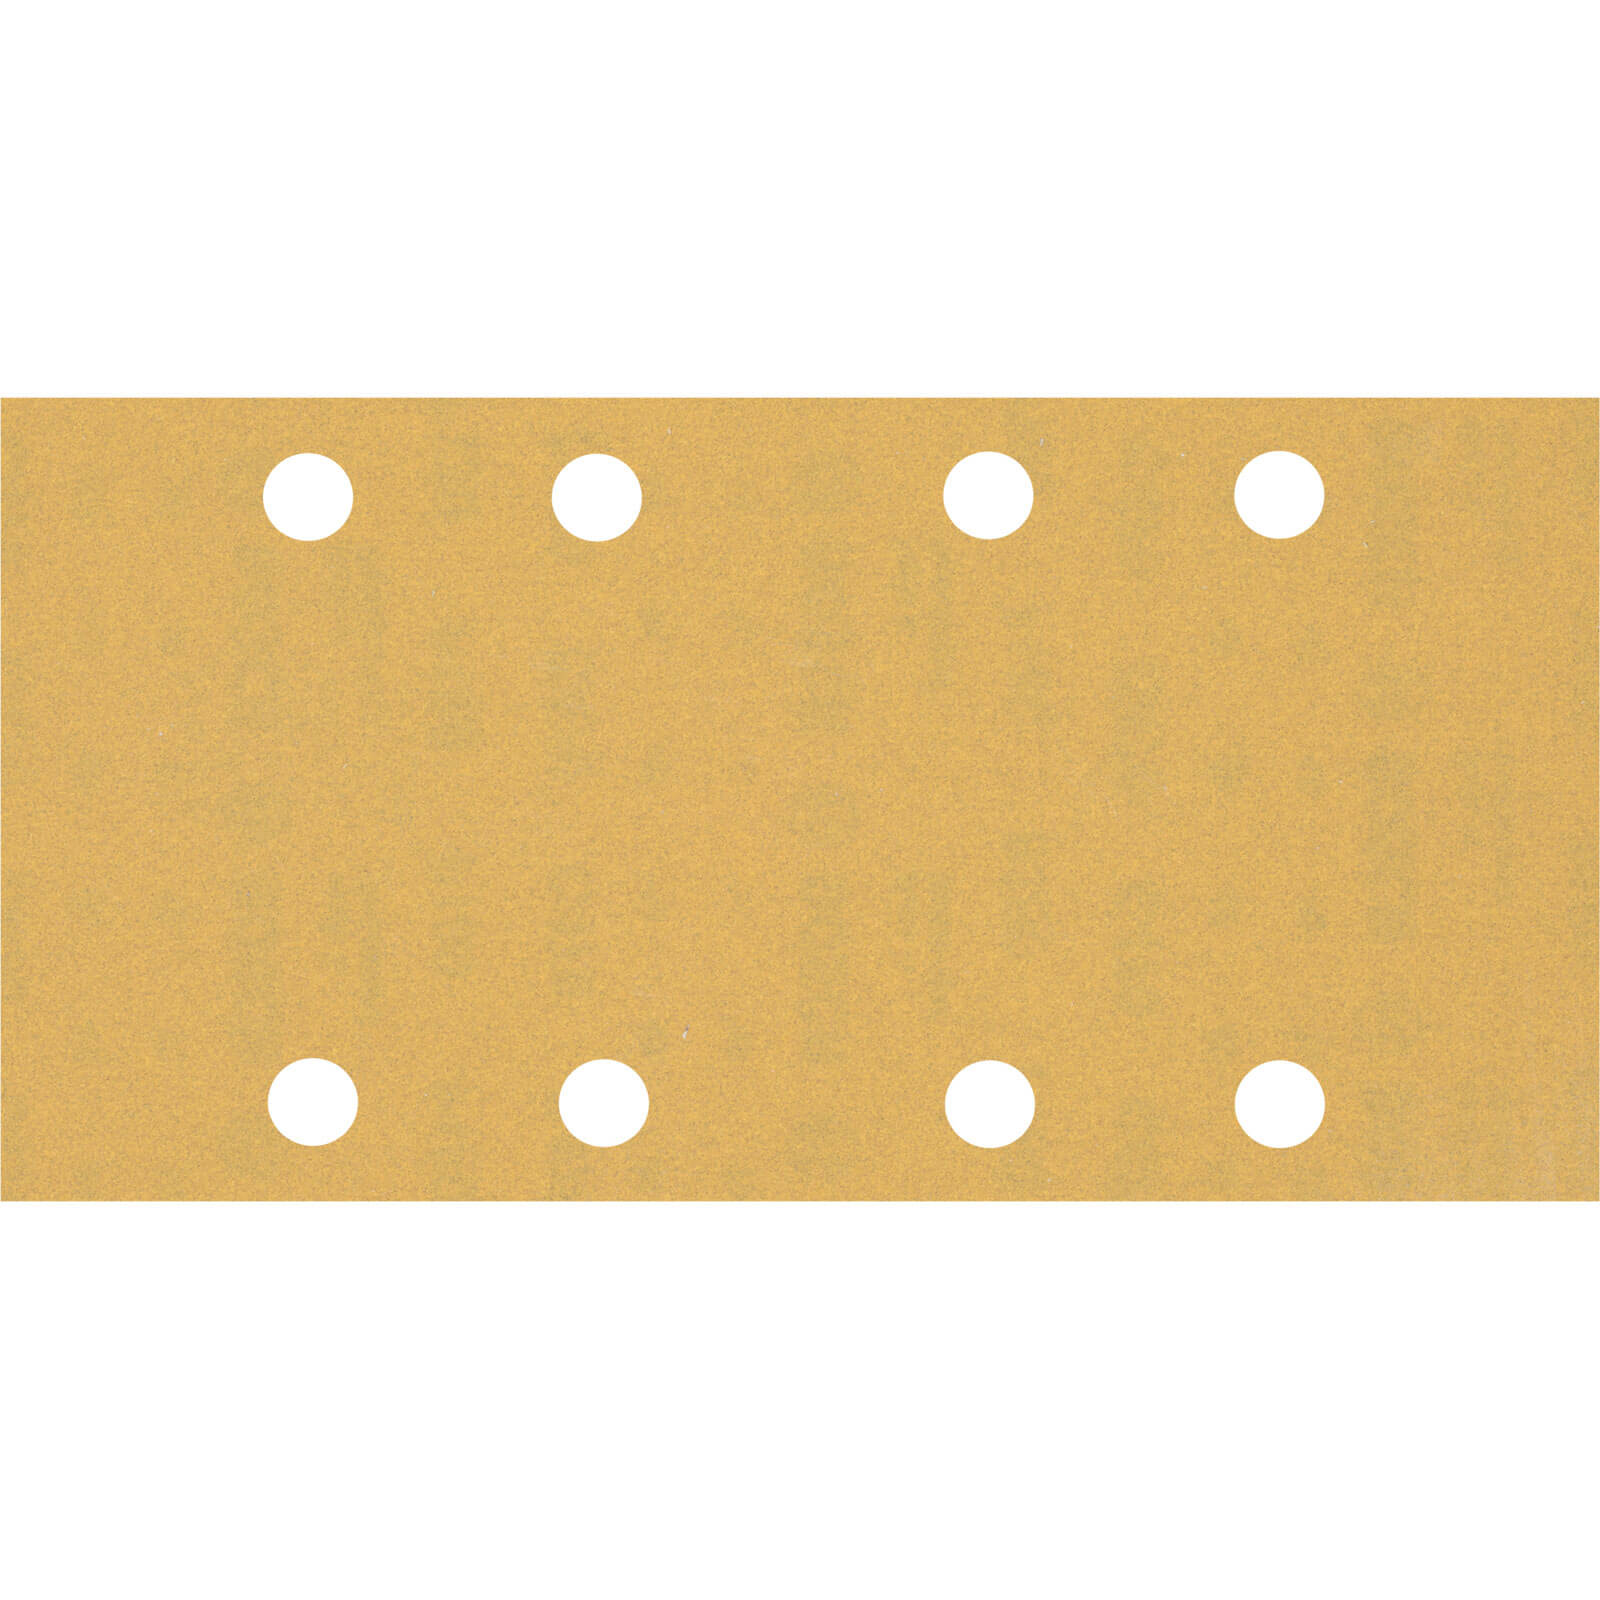 Image of Bosch Expert C470 Punched Hook and Loop Sanding Sheets 93mm x 186mm 180g Pack of 10